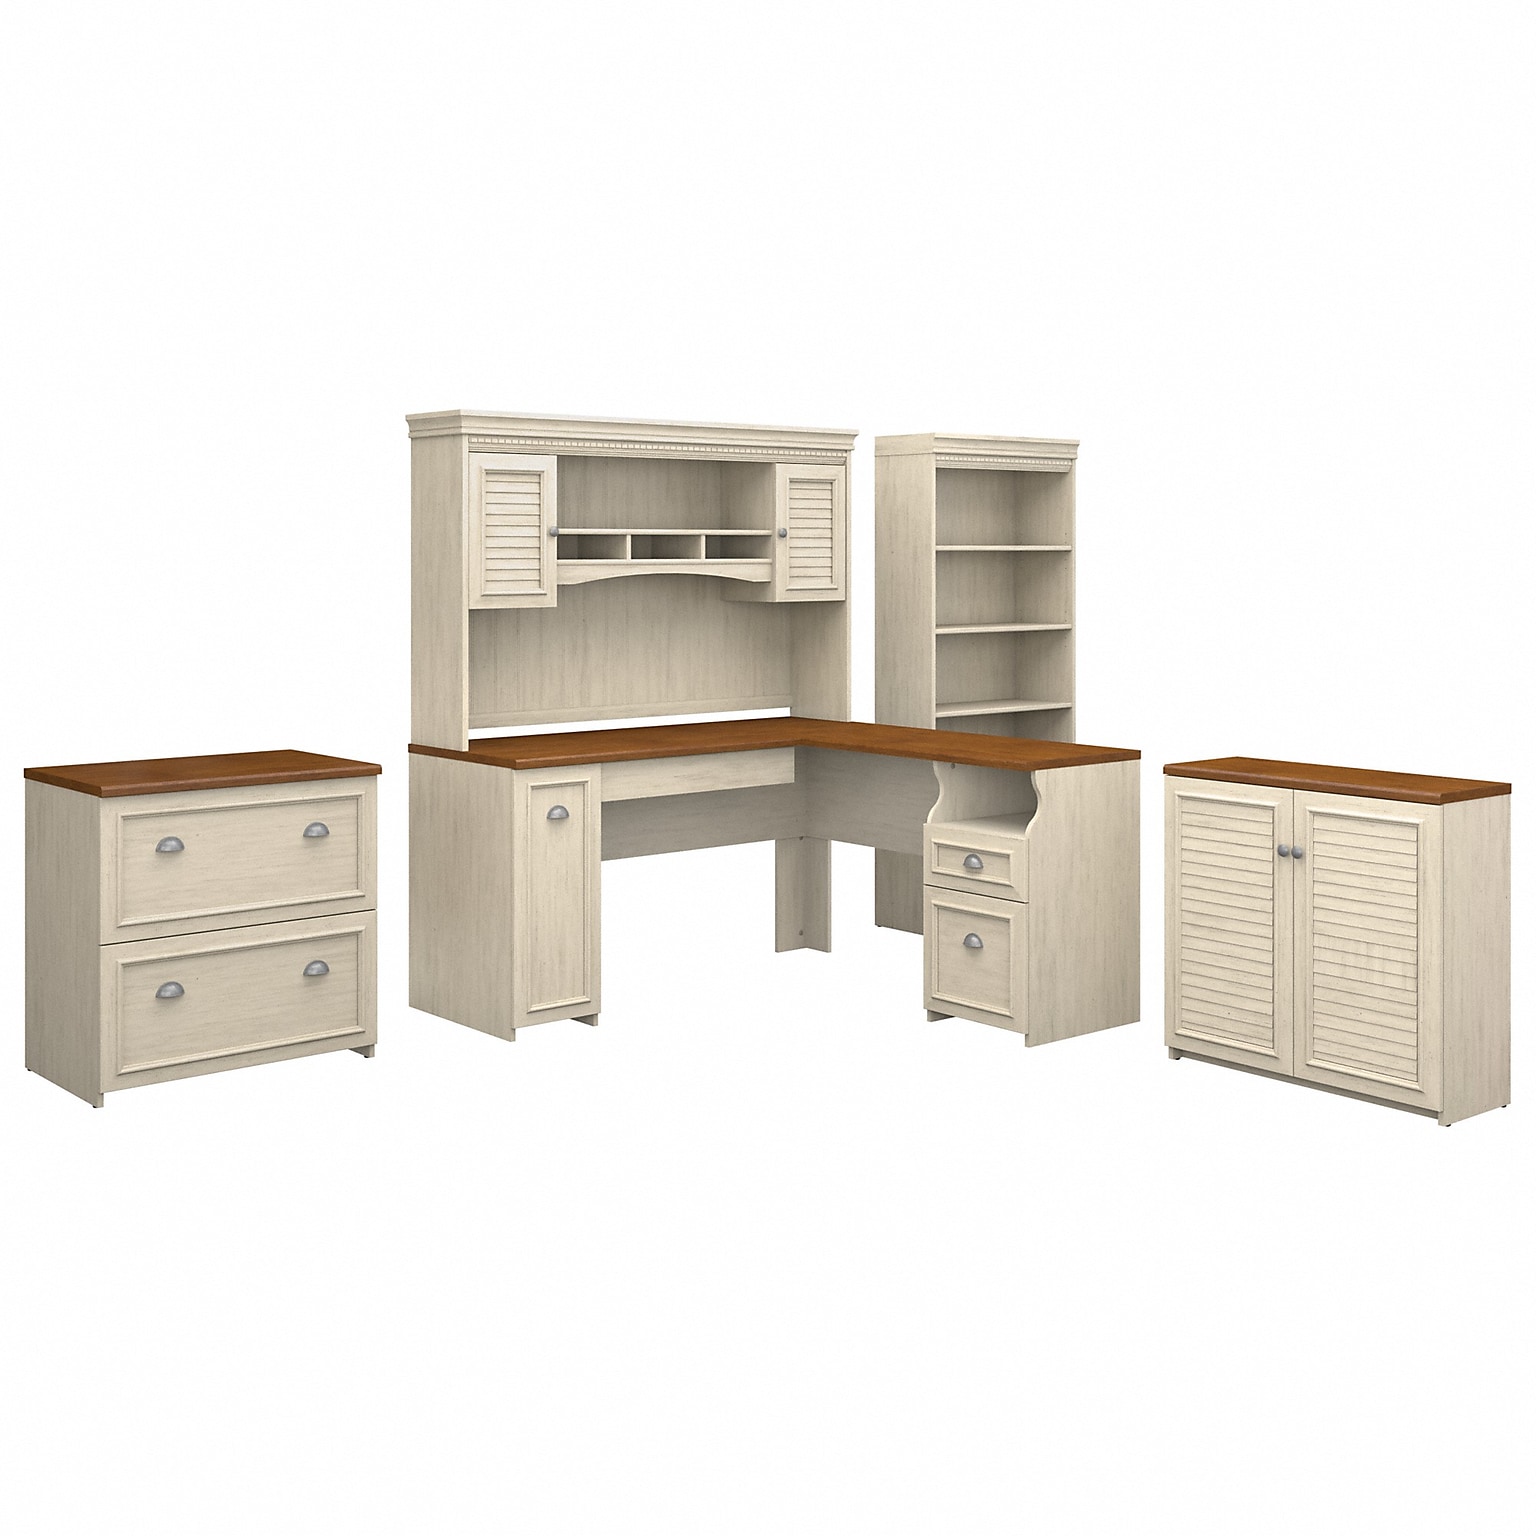 Bush Furniture Fairview 60W L Shaped Desk with Hutch, File Cabinet, Bookcase and Storage, Antique White/Tea Maple (FV013AW)